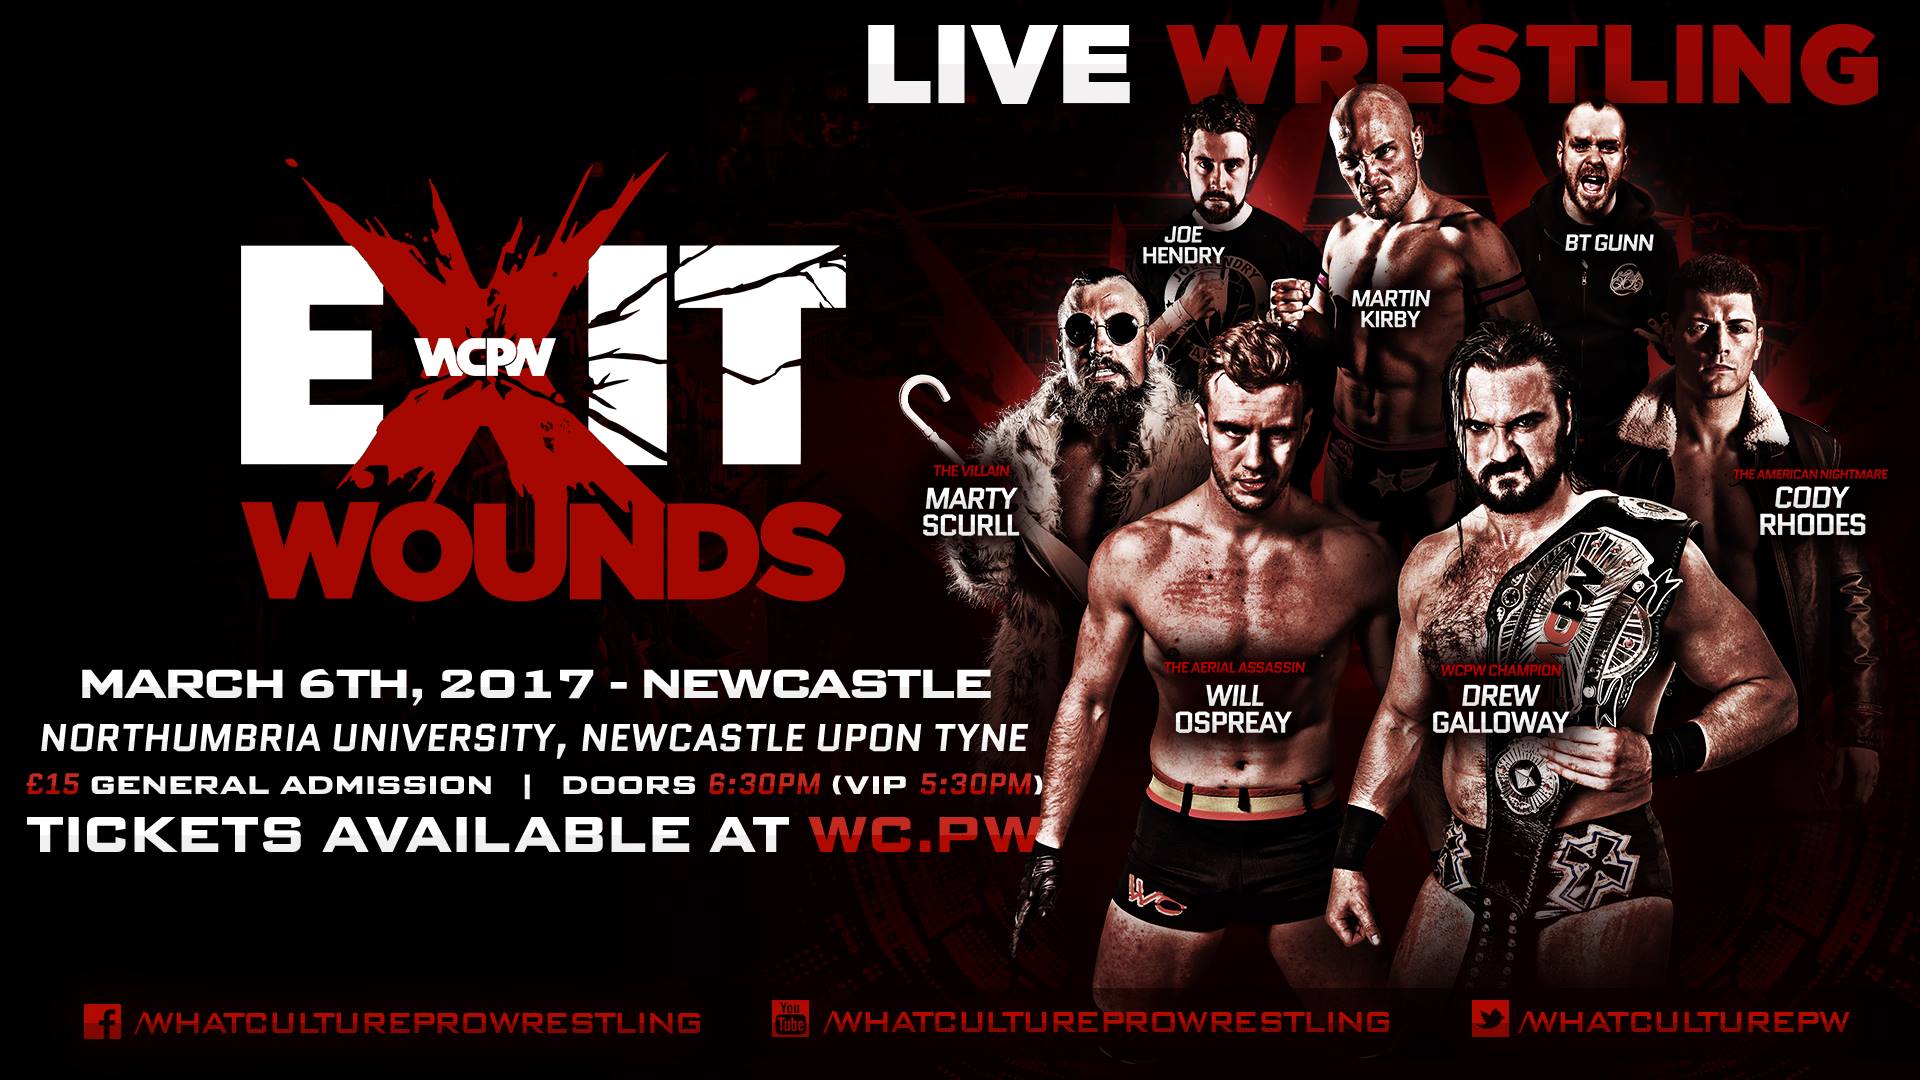 WCPW Exit Wounds Results: Drew Galloway VS Will Ospreay WCPW World